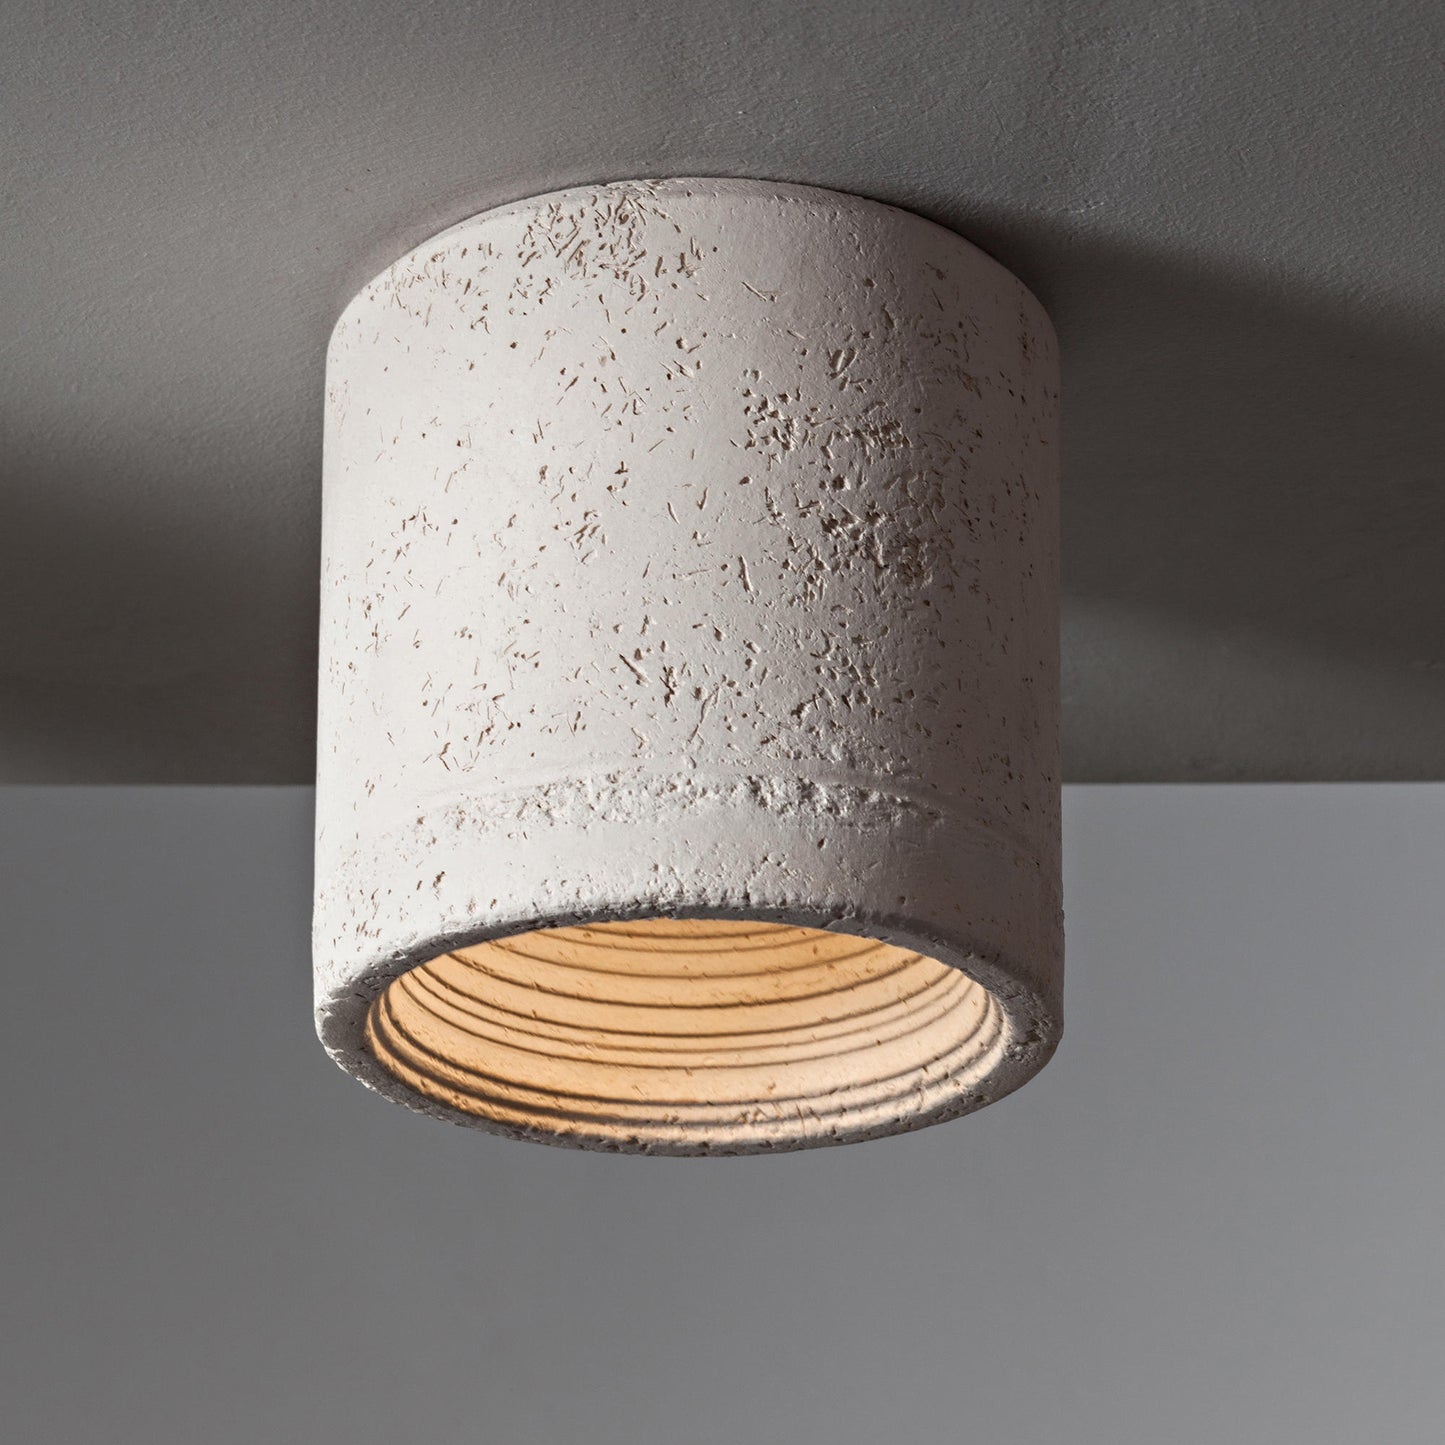 Carso 982 Ceiling Light by Toscot